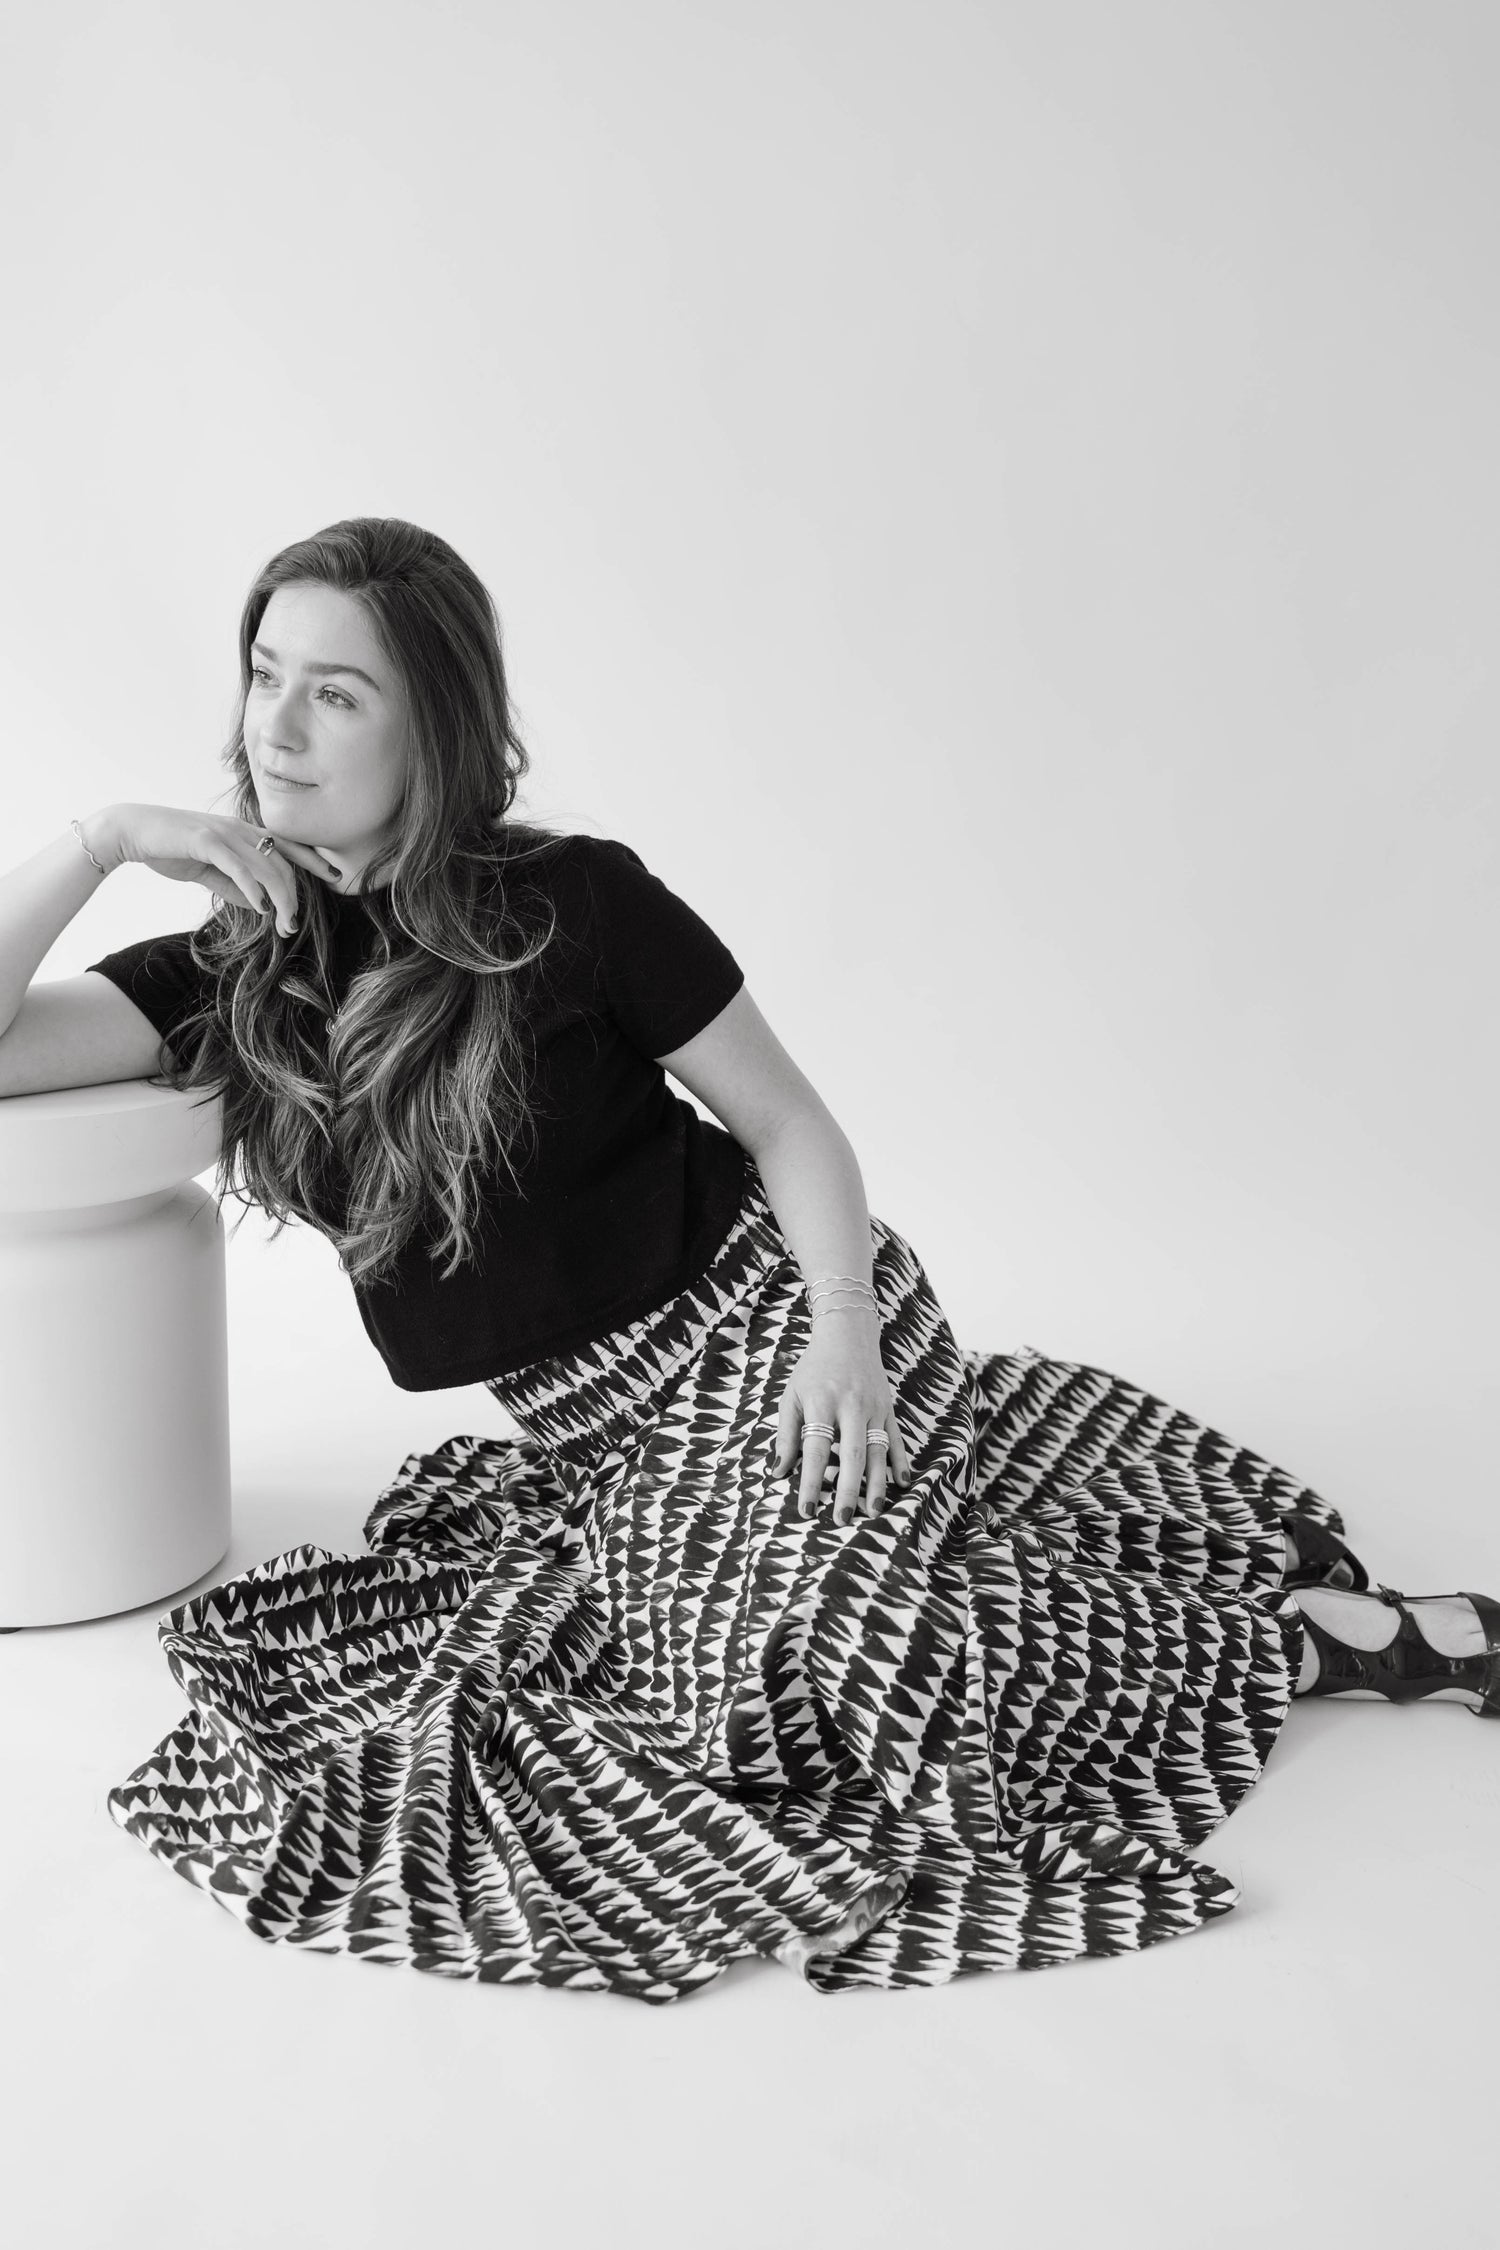 jewelry designer Lily Wujek sits on the floor in a wide black and white skirt